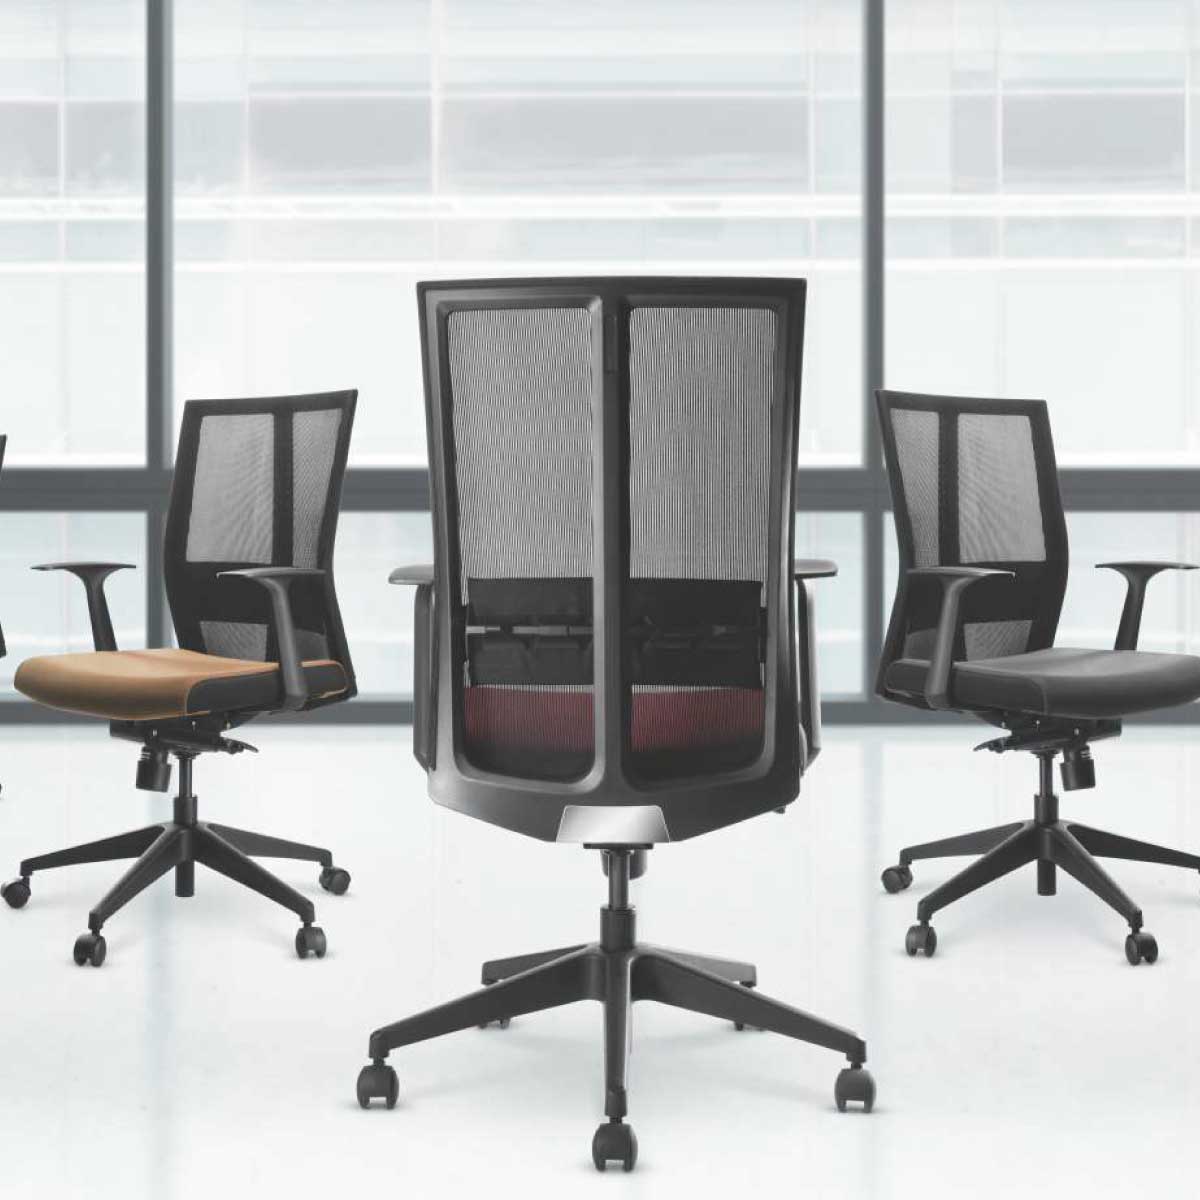 Visitor Chair Manufacturers, Suppliers in Kalindi Kunj